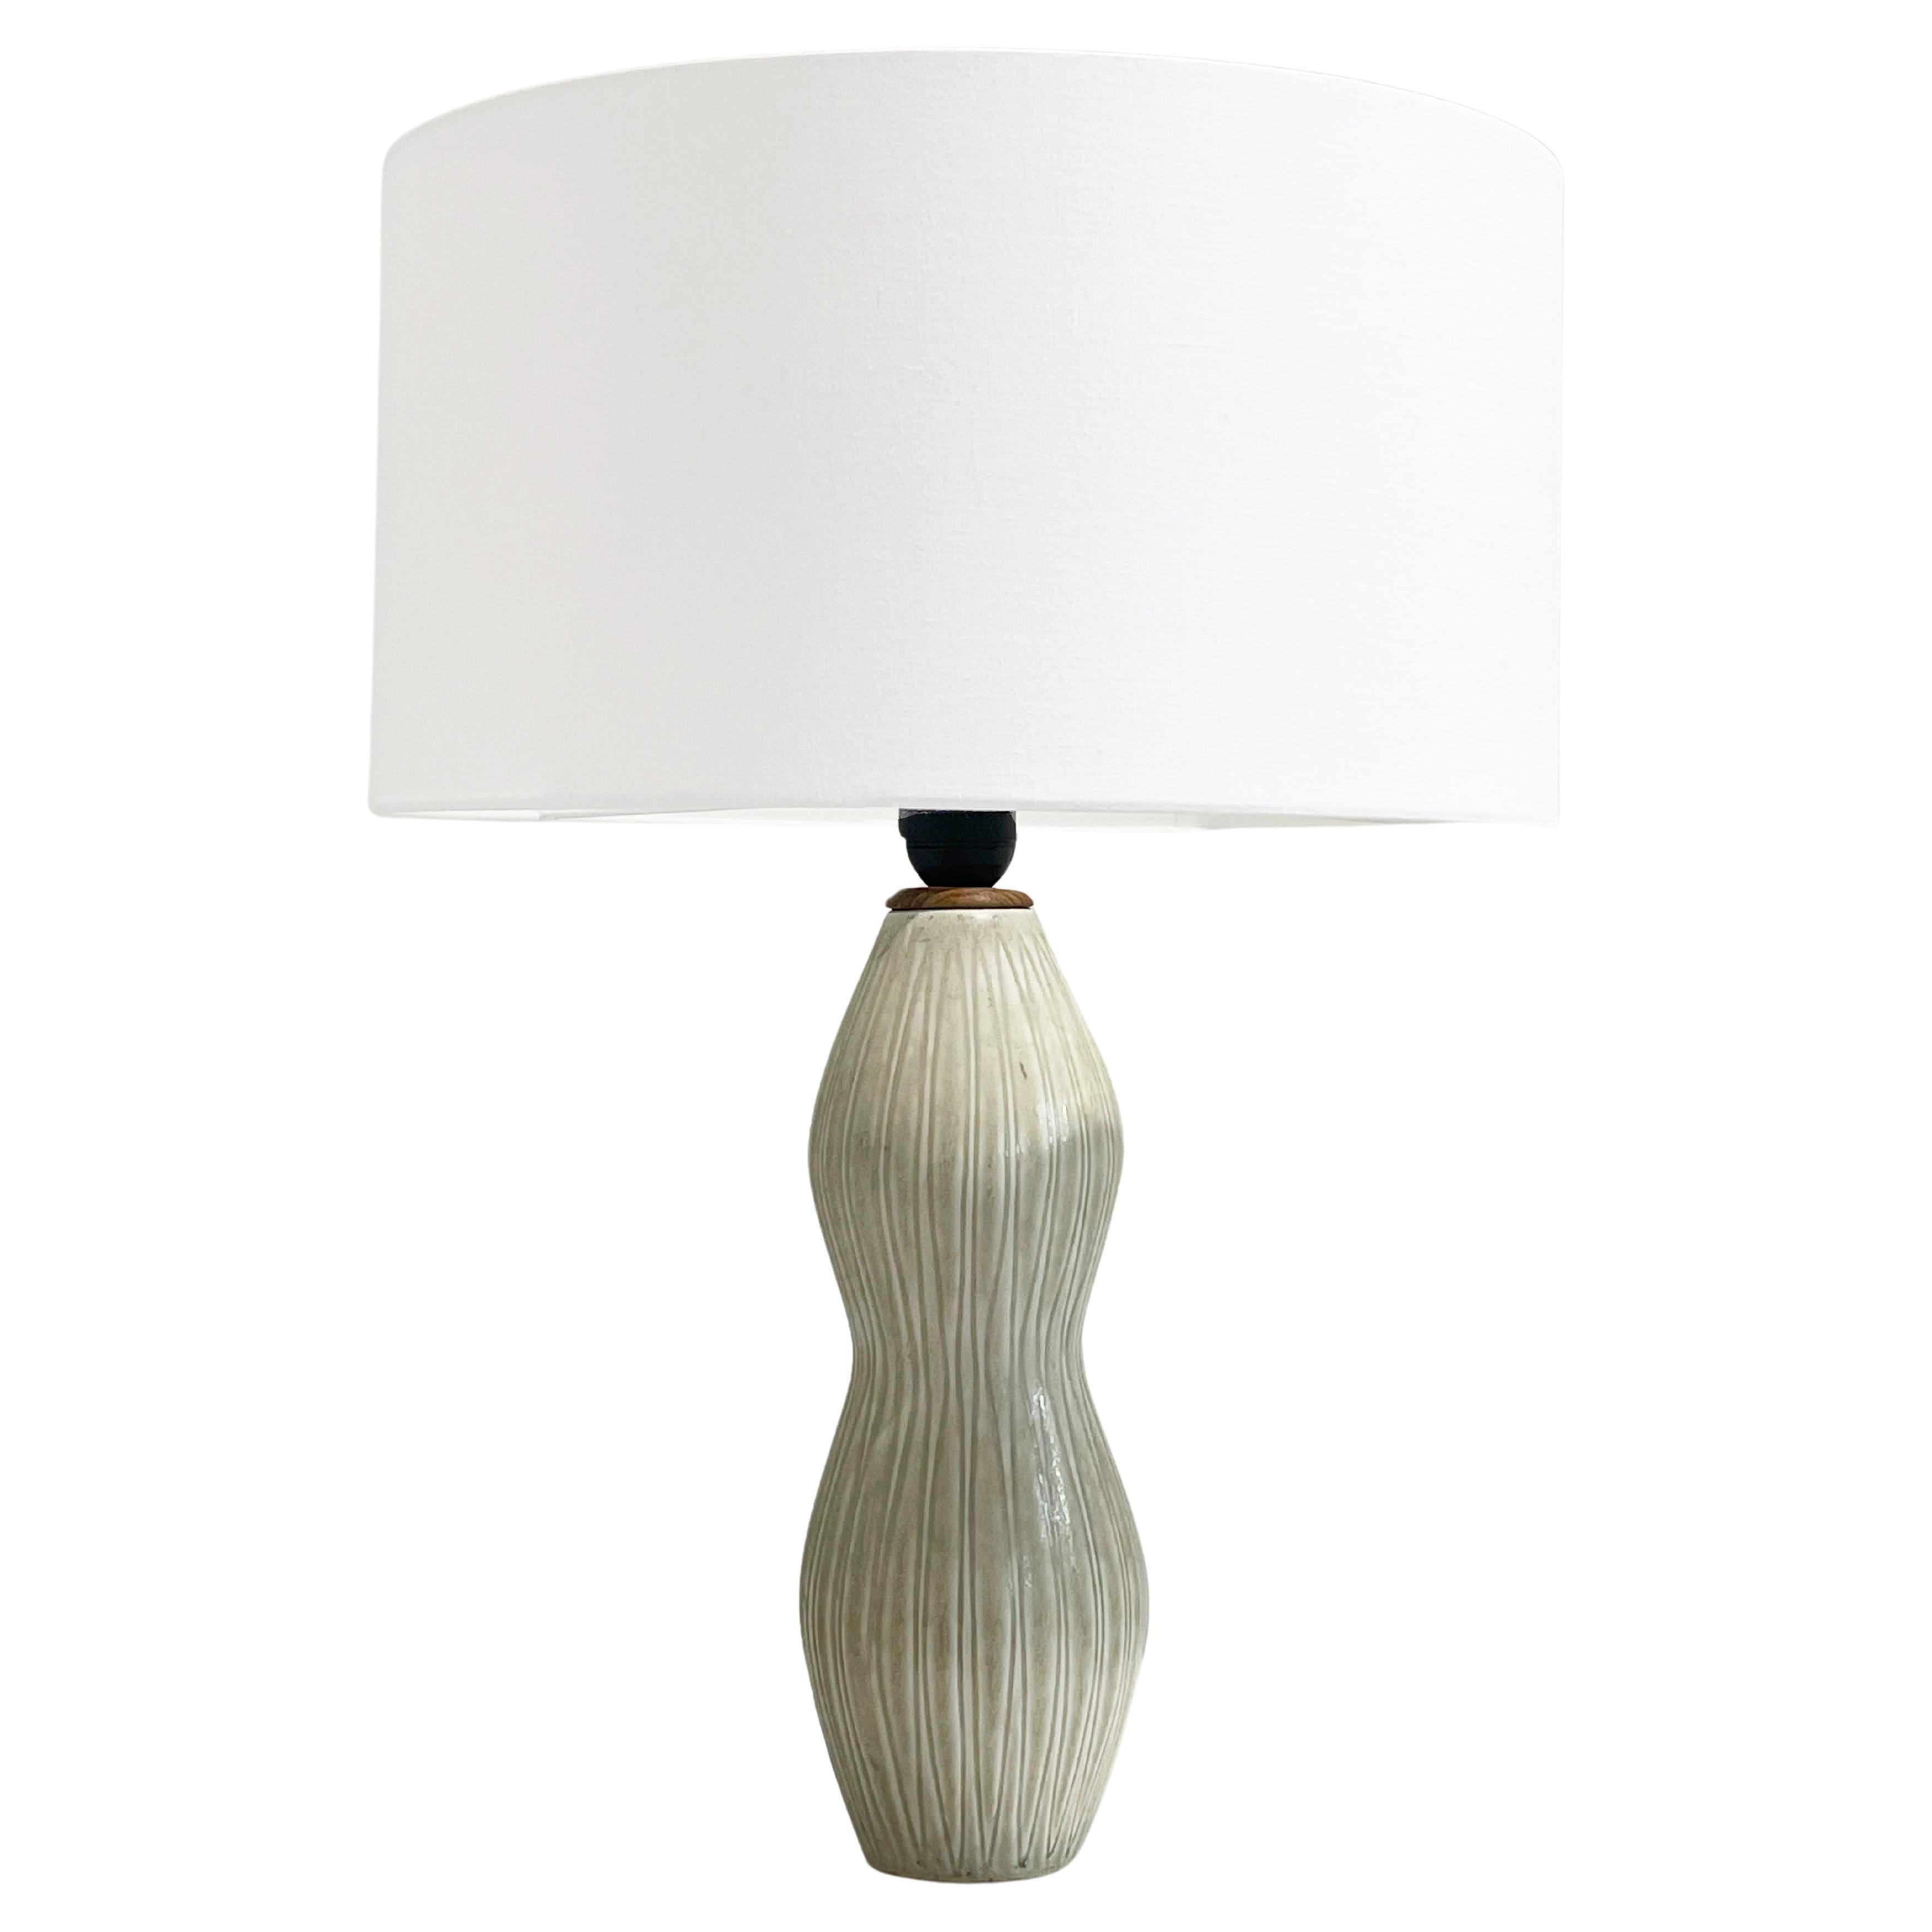 1960s Carl-Harry Stålhane Stoneware Table Lamp For Sale